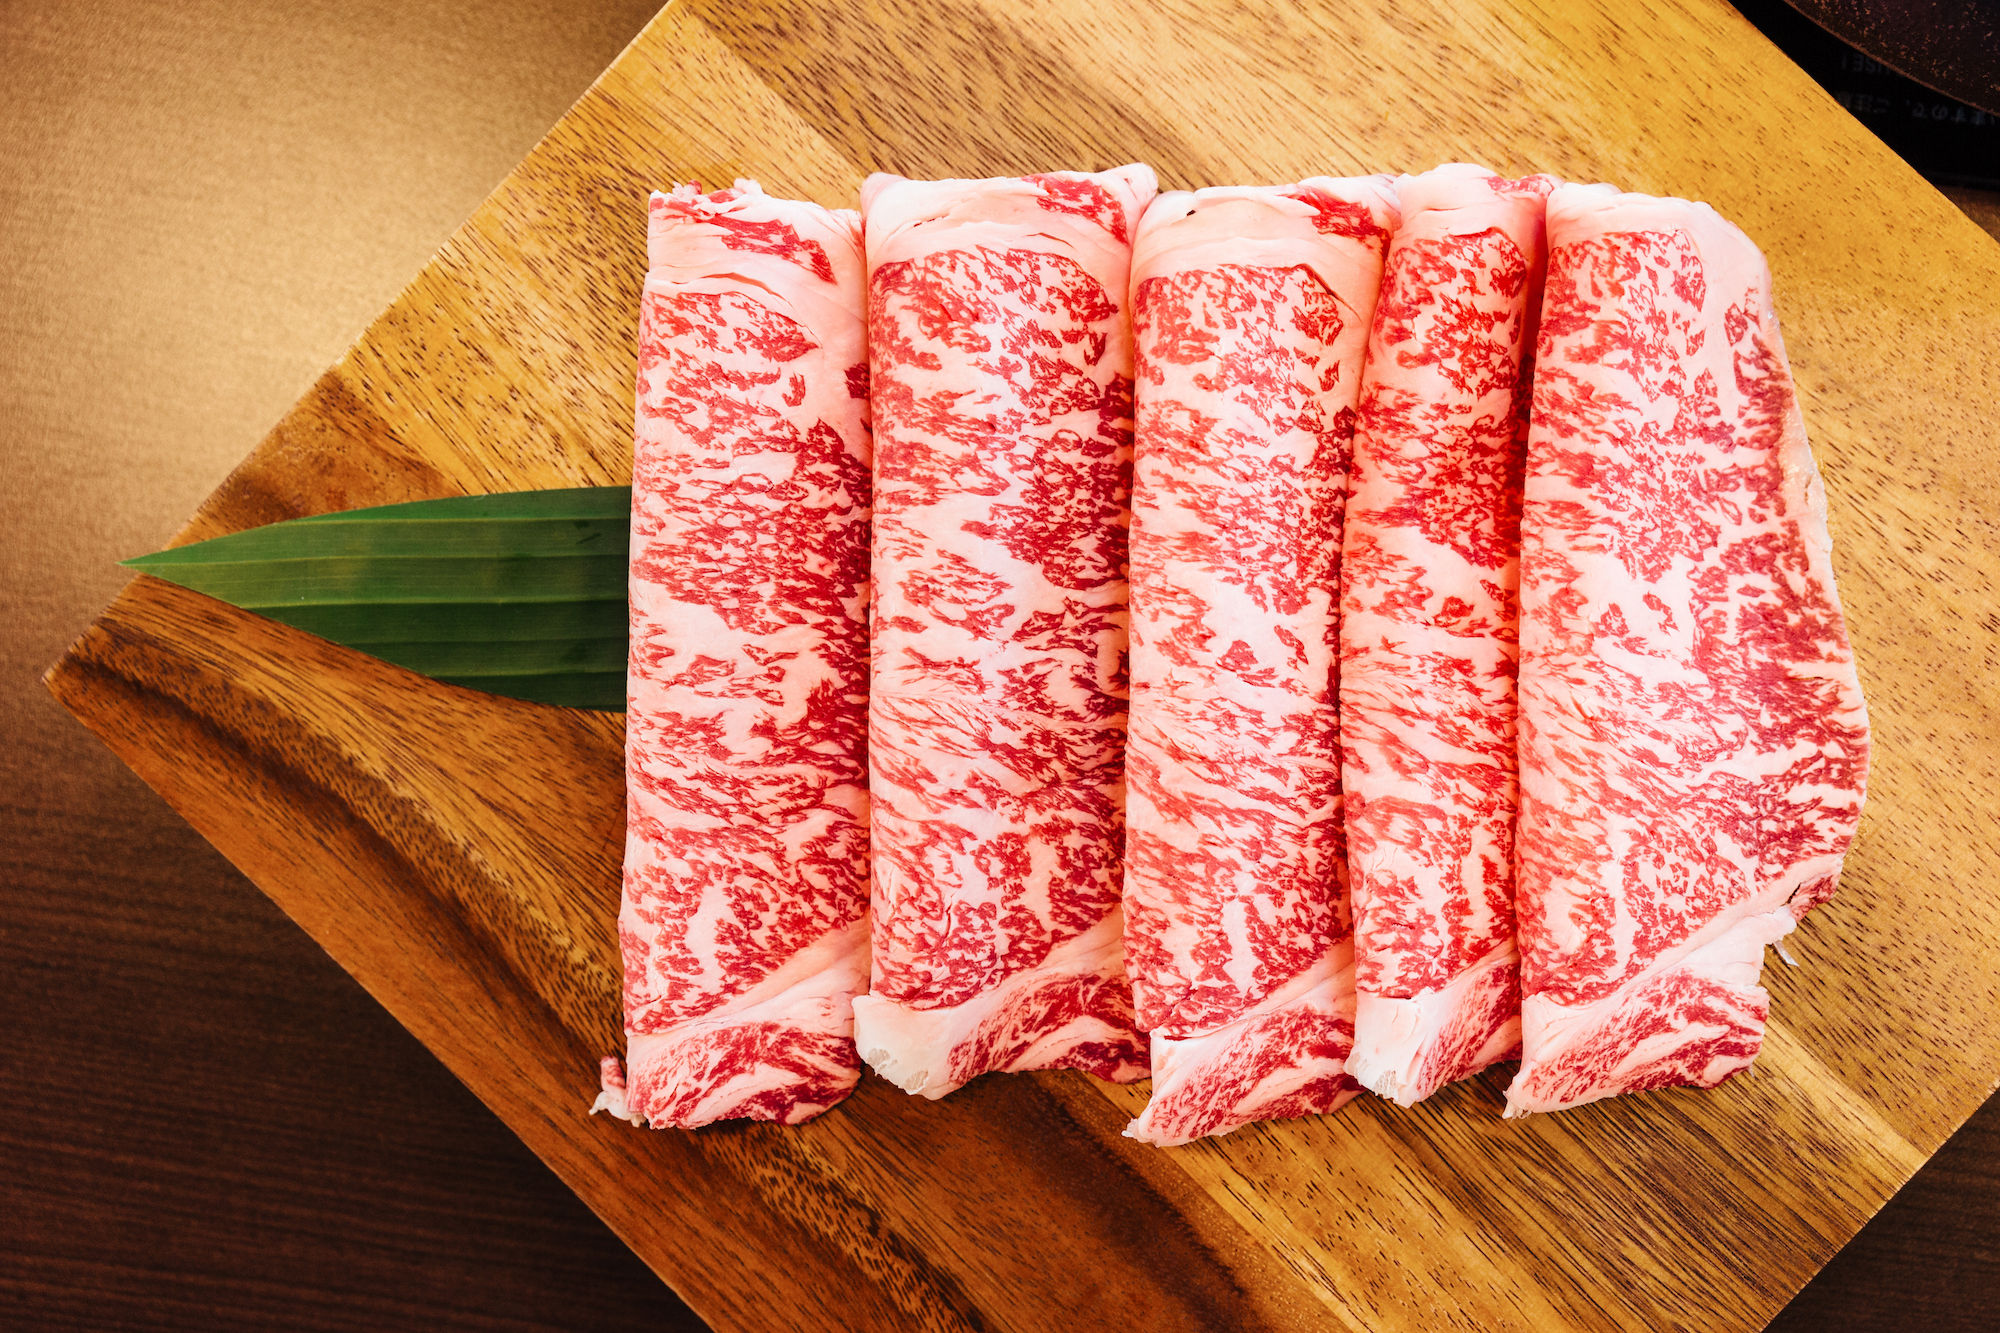 https://images.lifestyleasia.com/wp-content/uploads/sites/6/2022/08/17170738/wagyu-beef.jpg